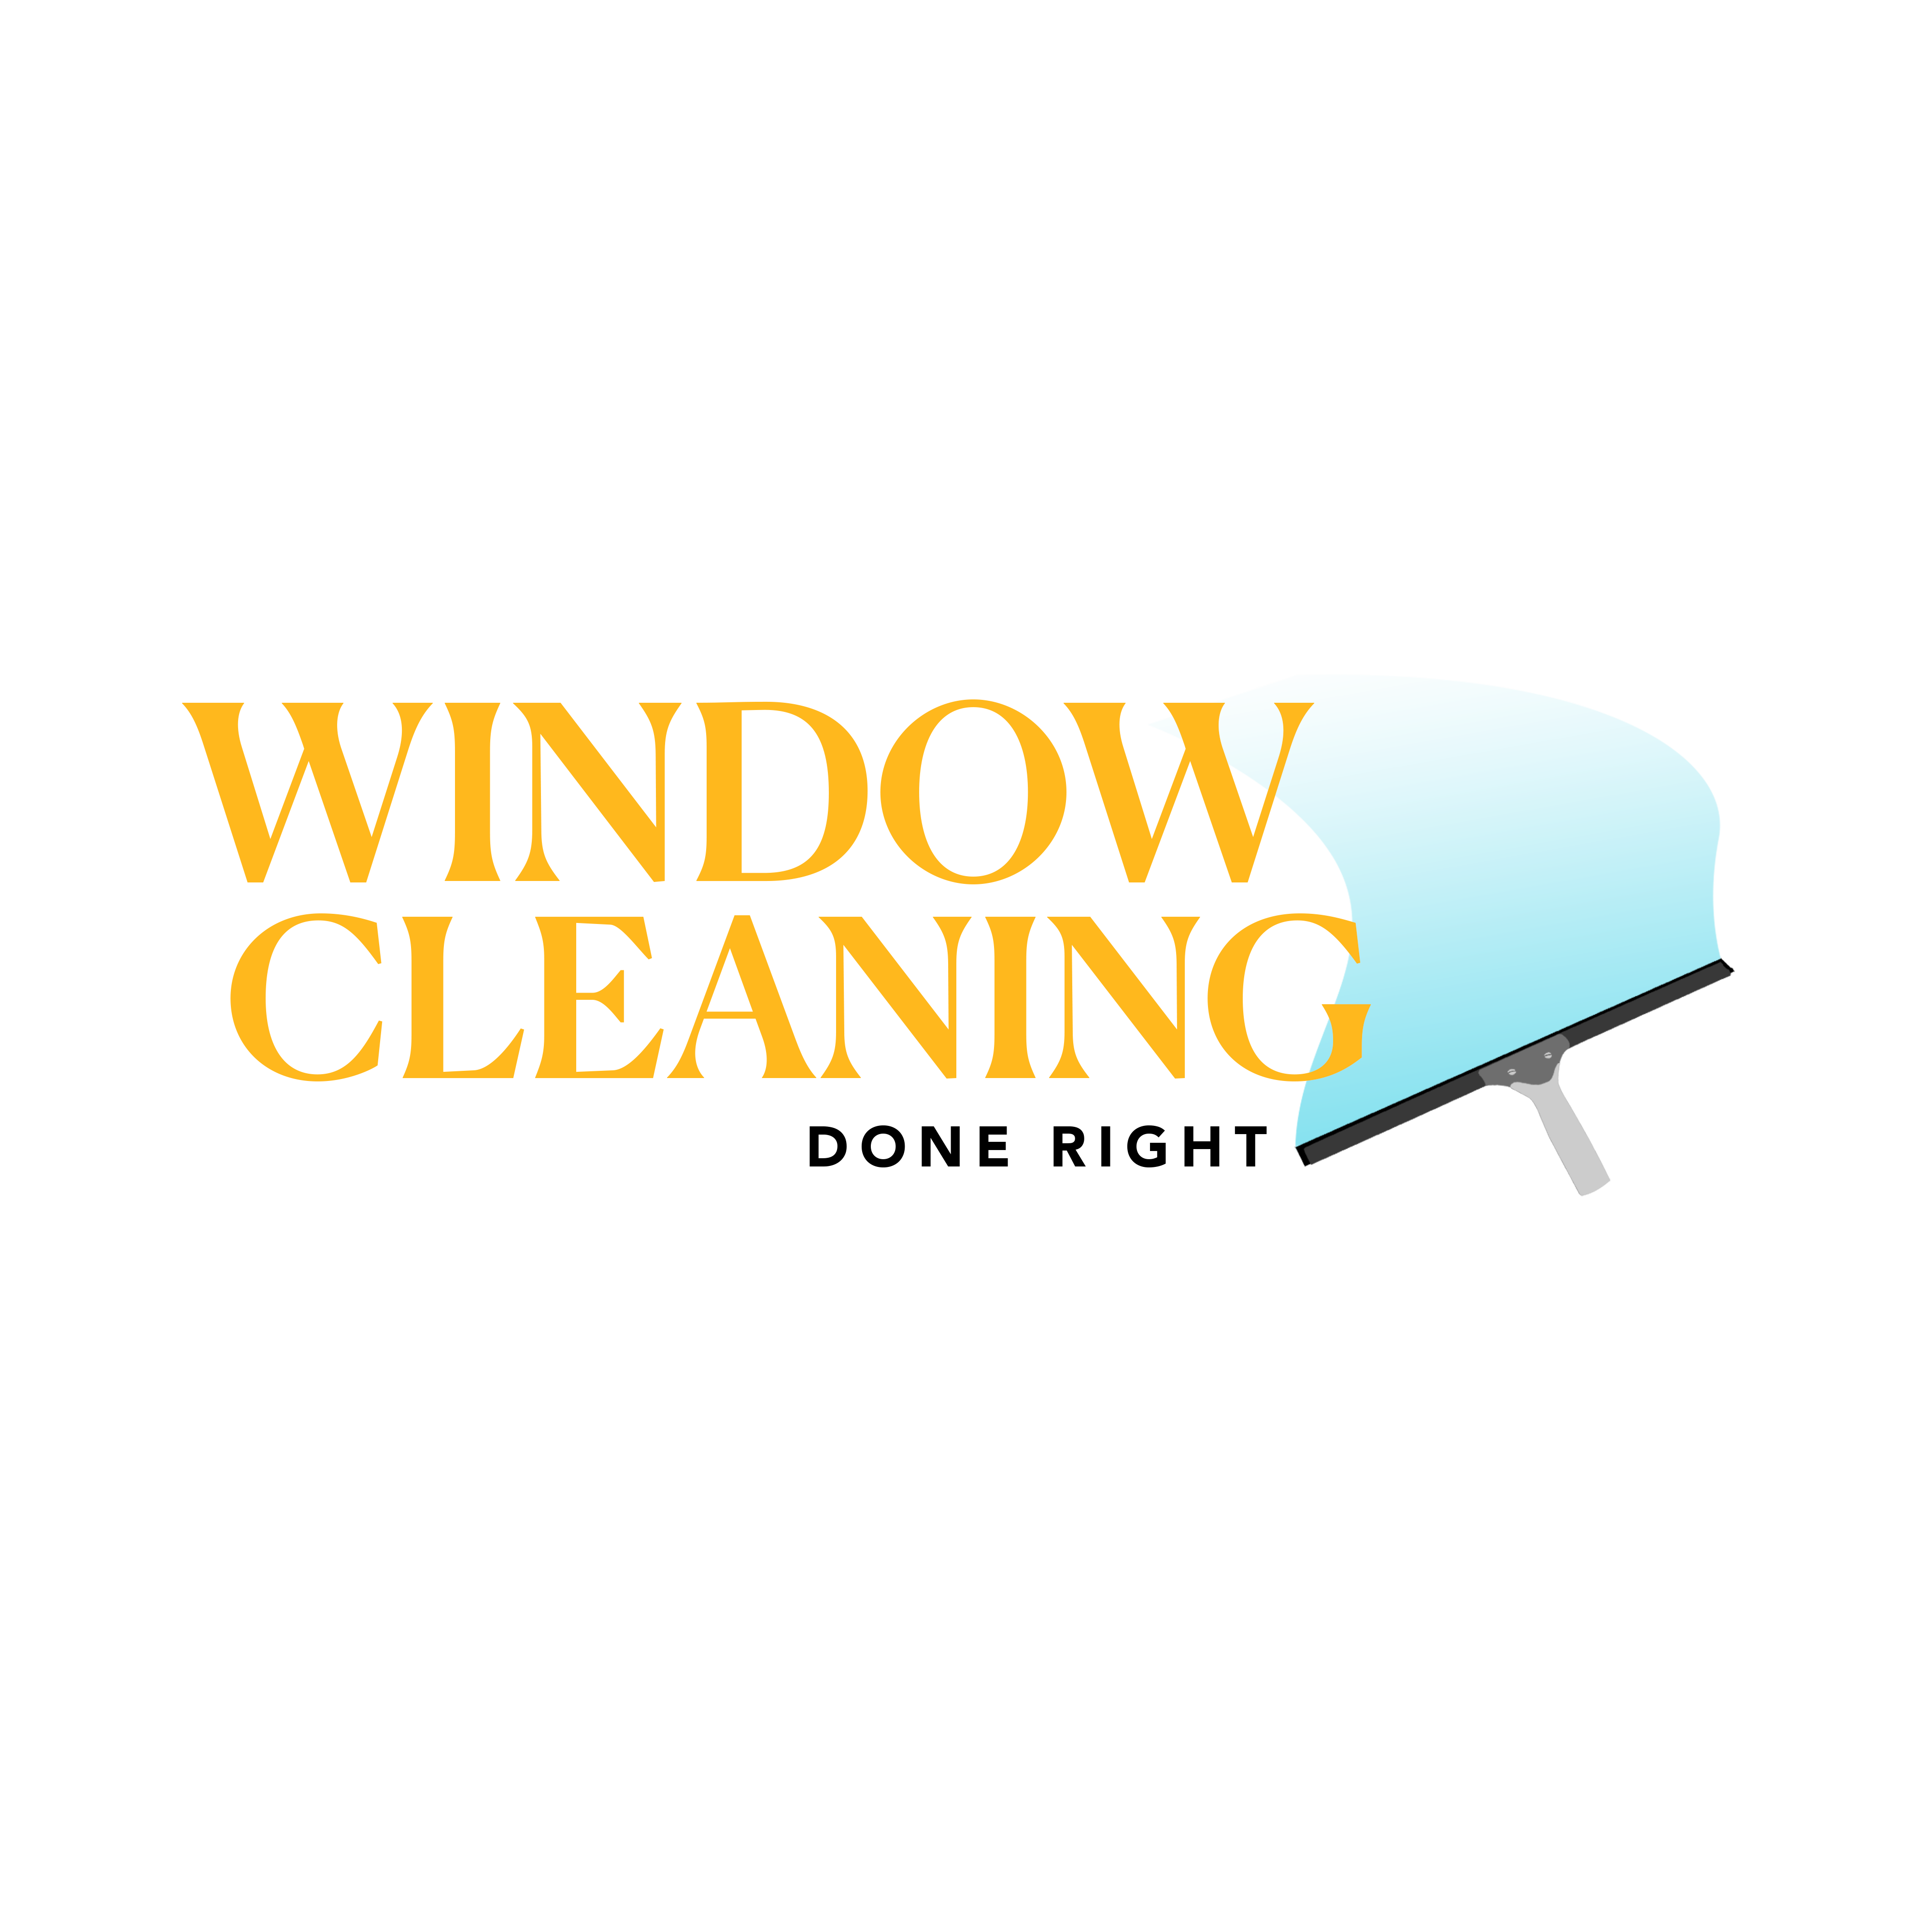 Window Cleaning Done Right